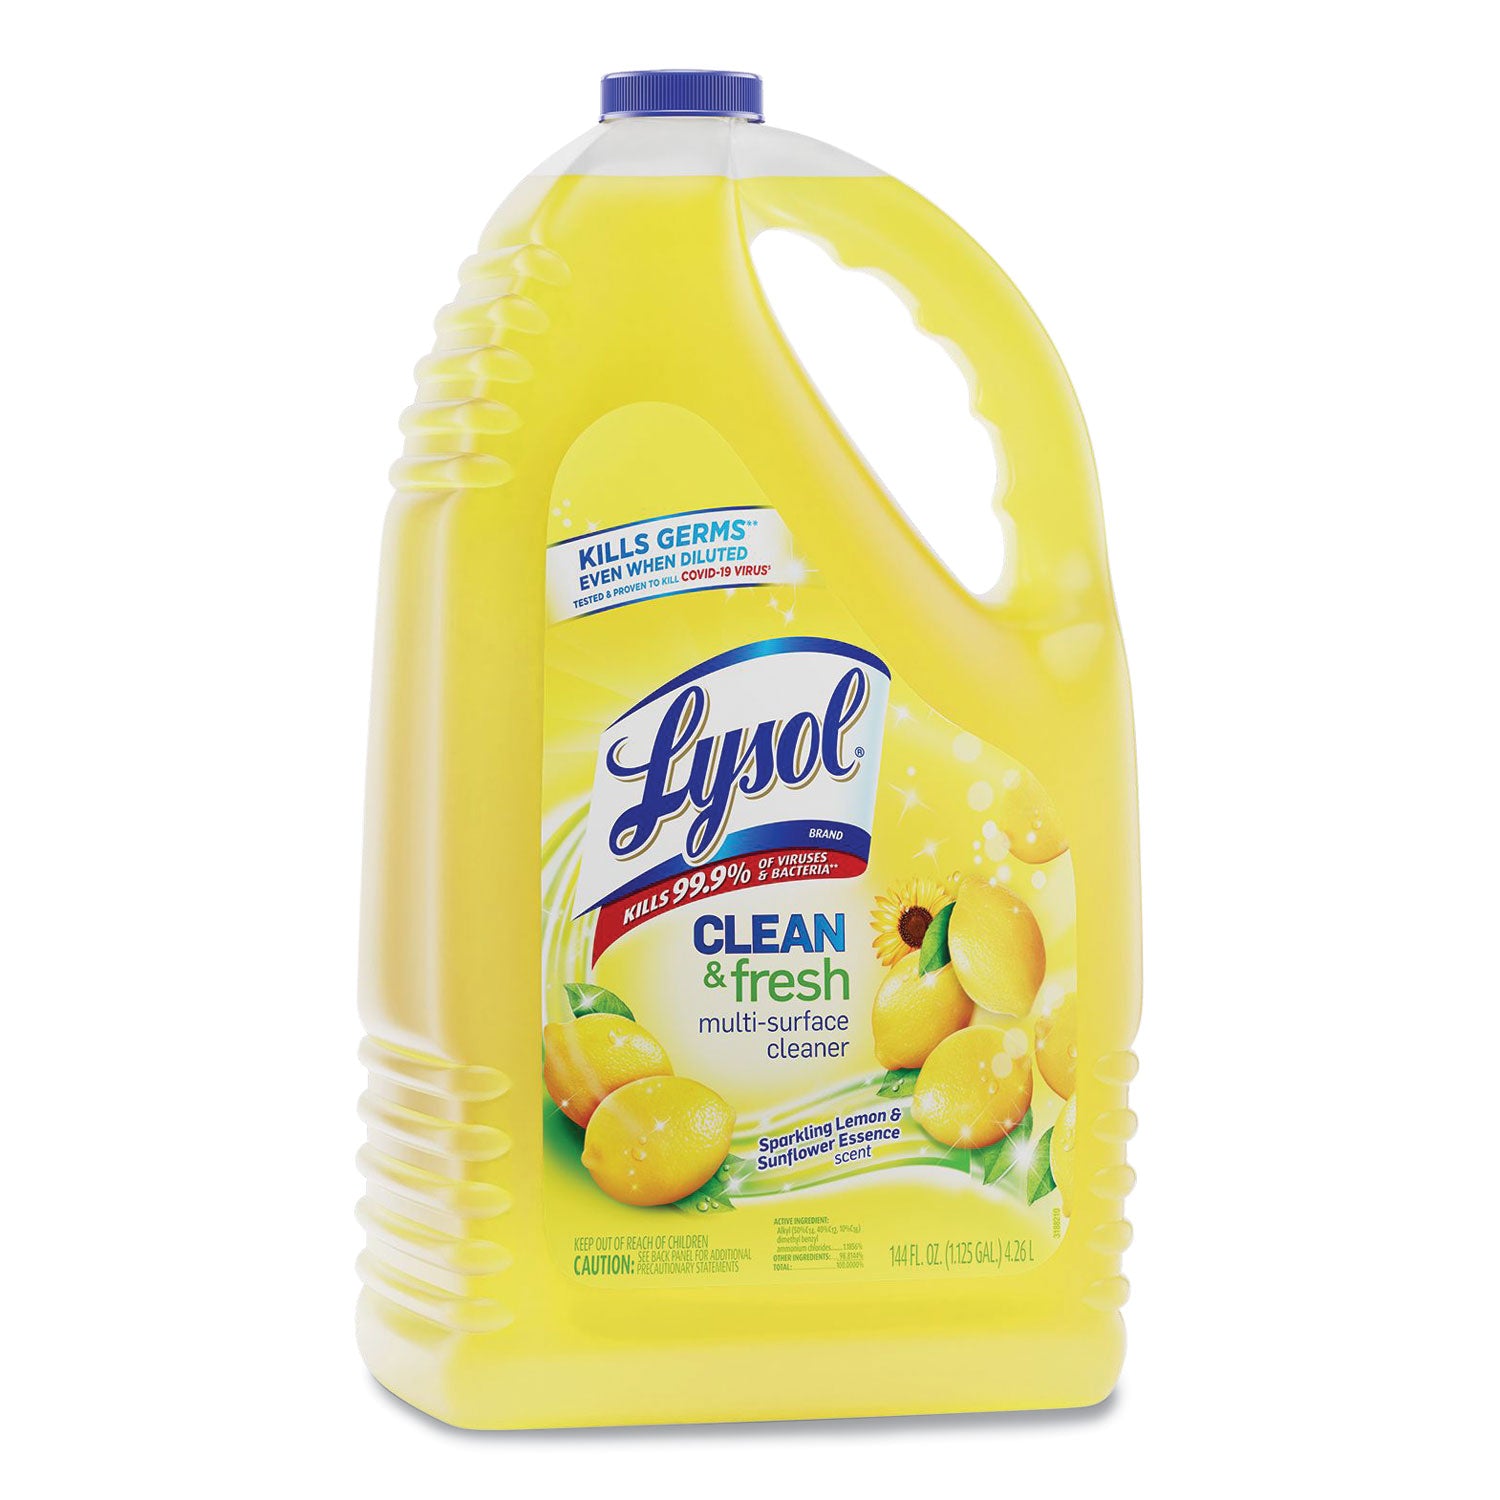 clean-and-fresh-multi-surface-cleaner-sparkling-lemon-and-sunflower-essence-144-oz-bottle-4-carton_rac77617 - 2